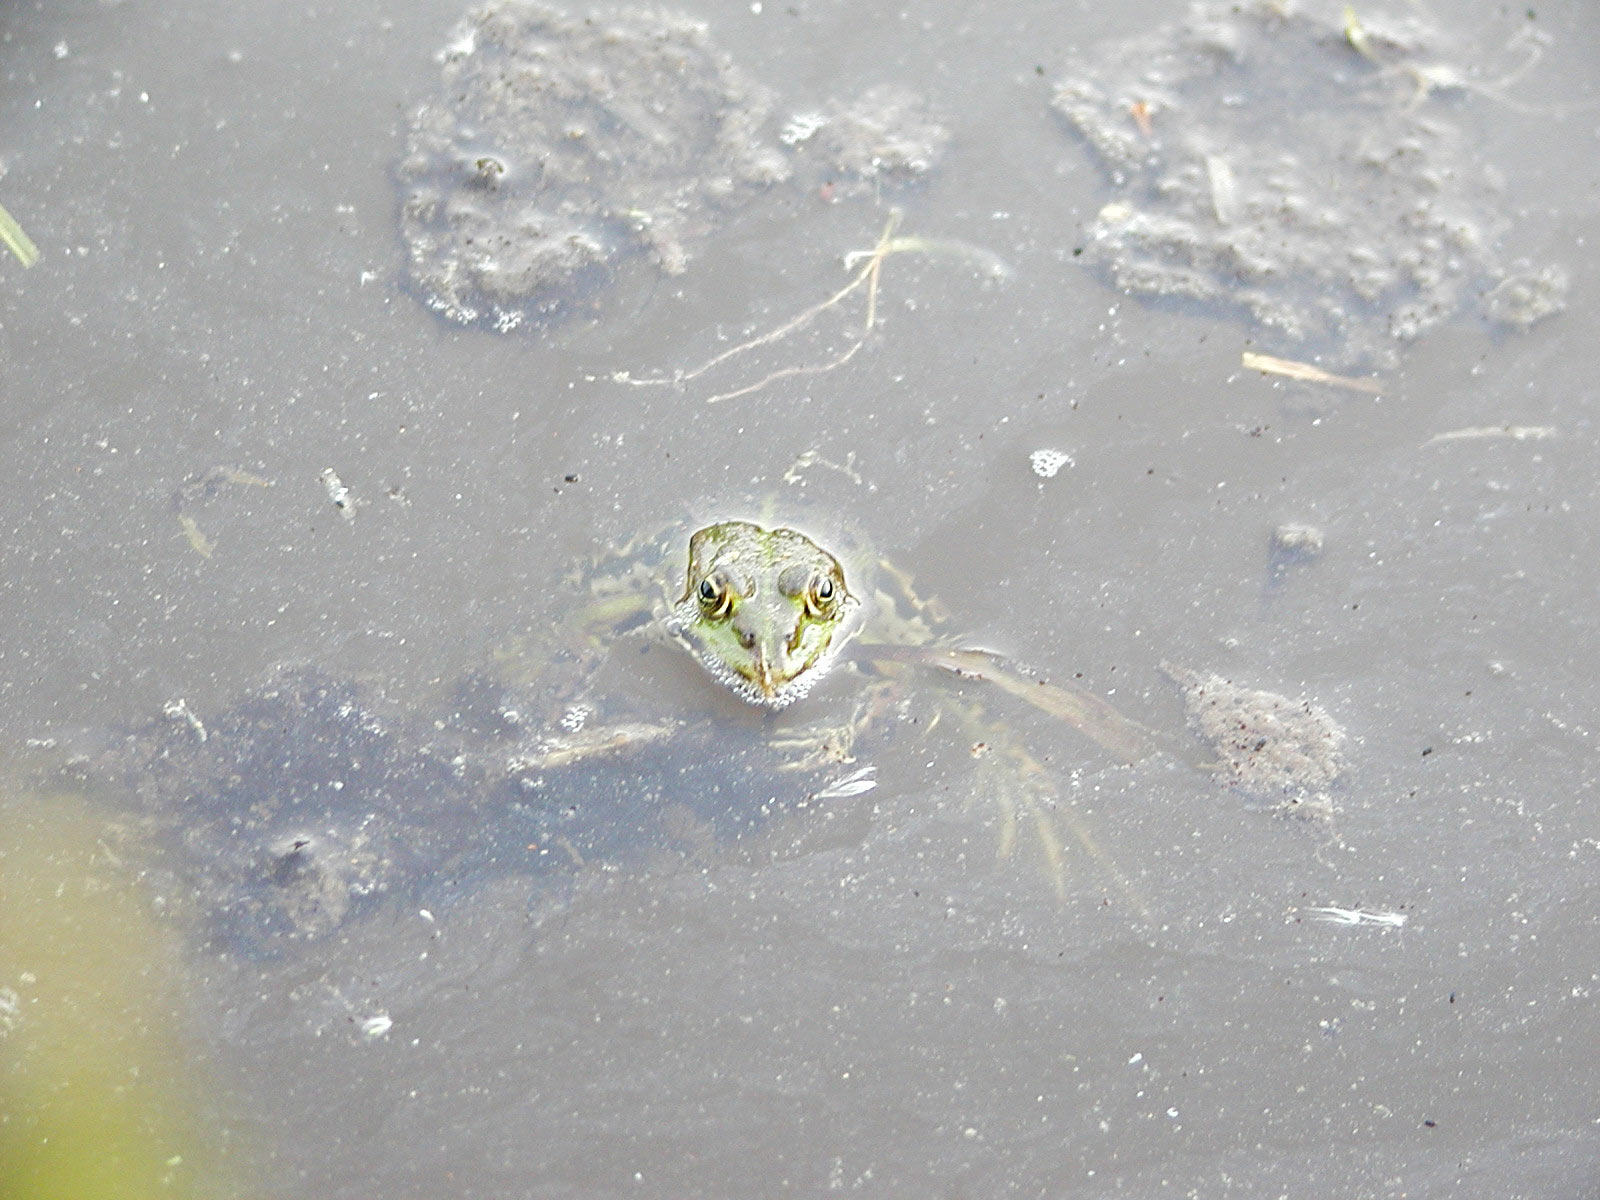 Frog in a pond photo